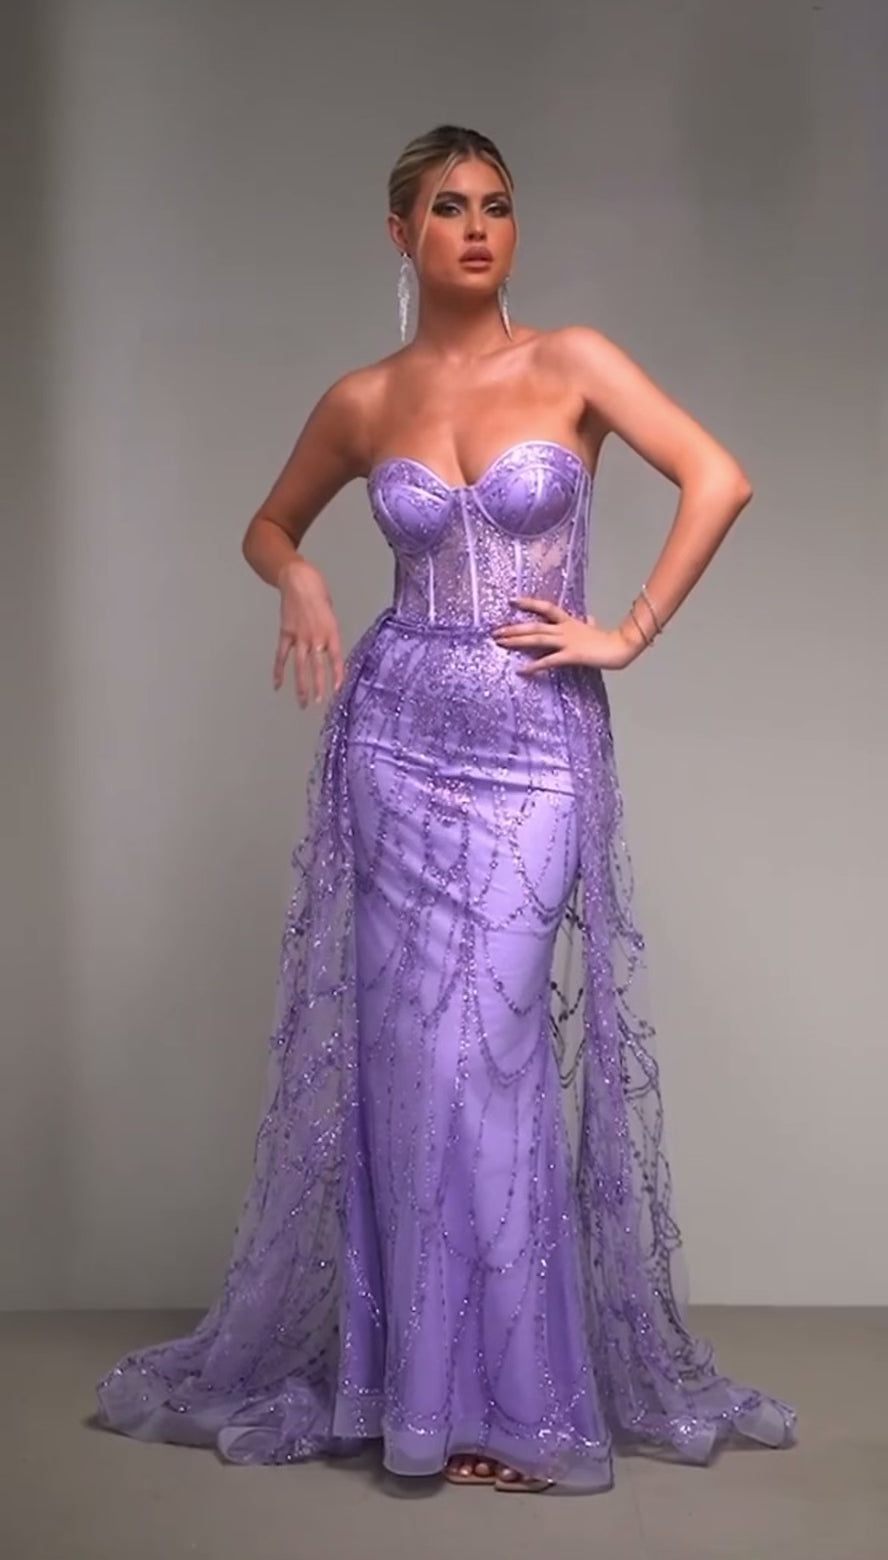 Classy and alluring strapless mermaid gown for any occasion with glitters in lavender color